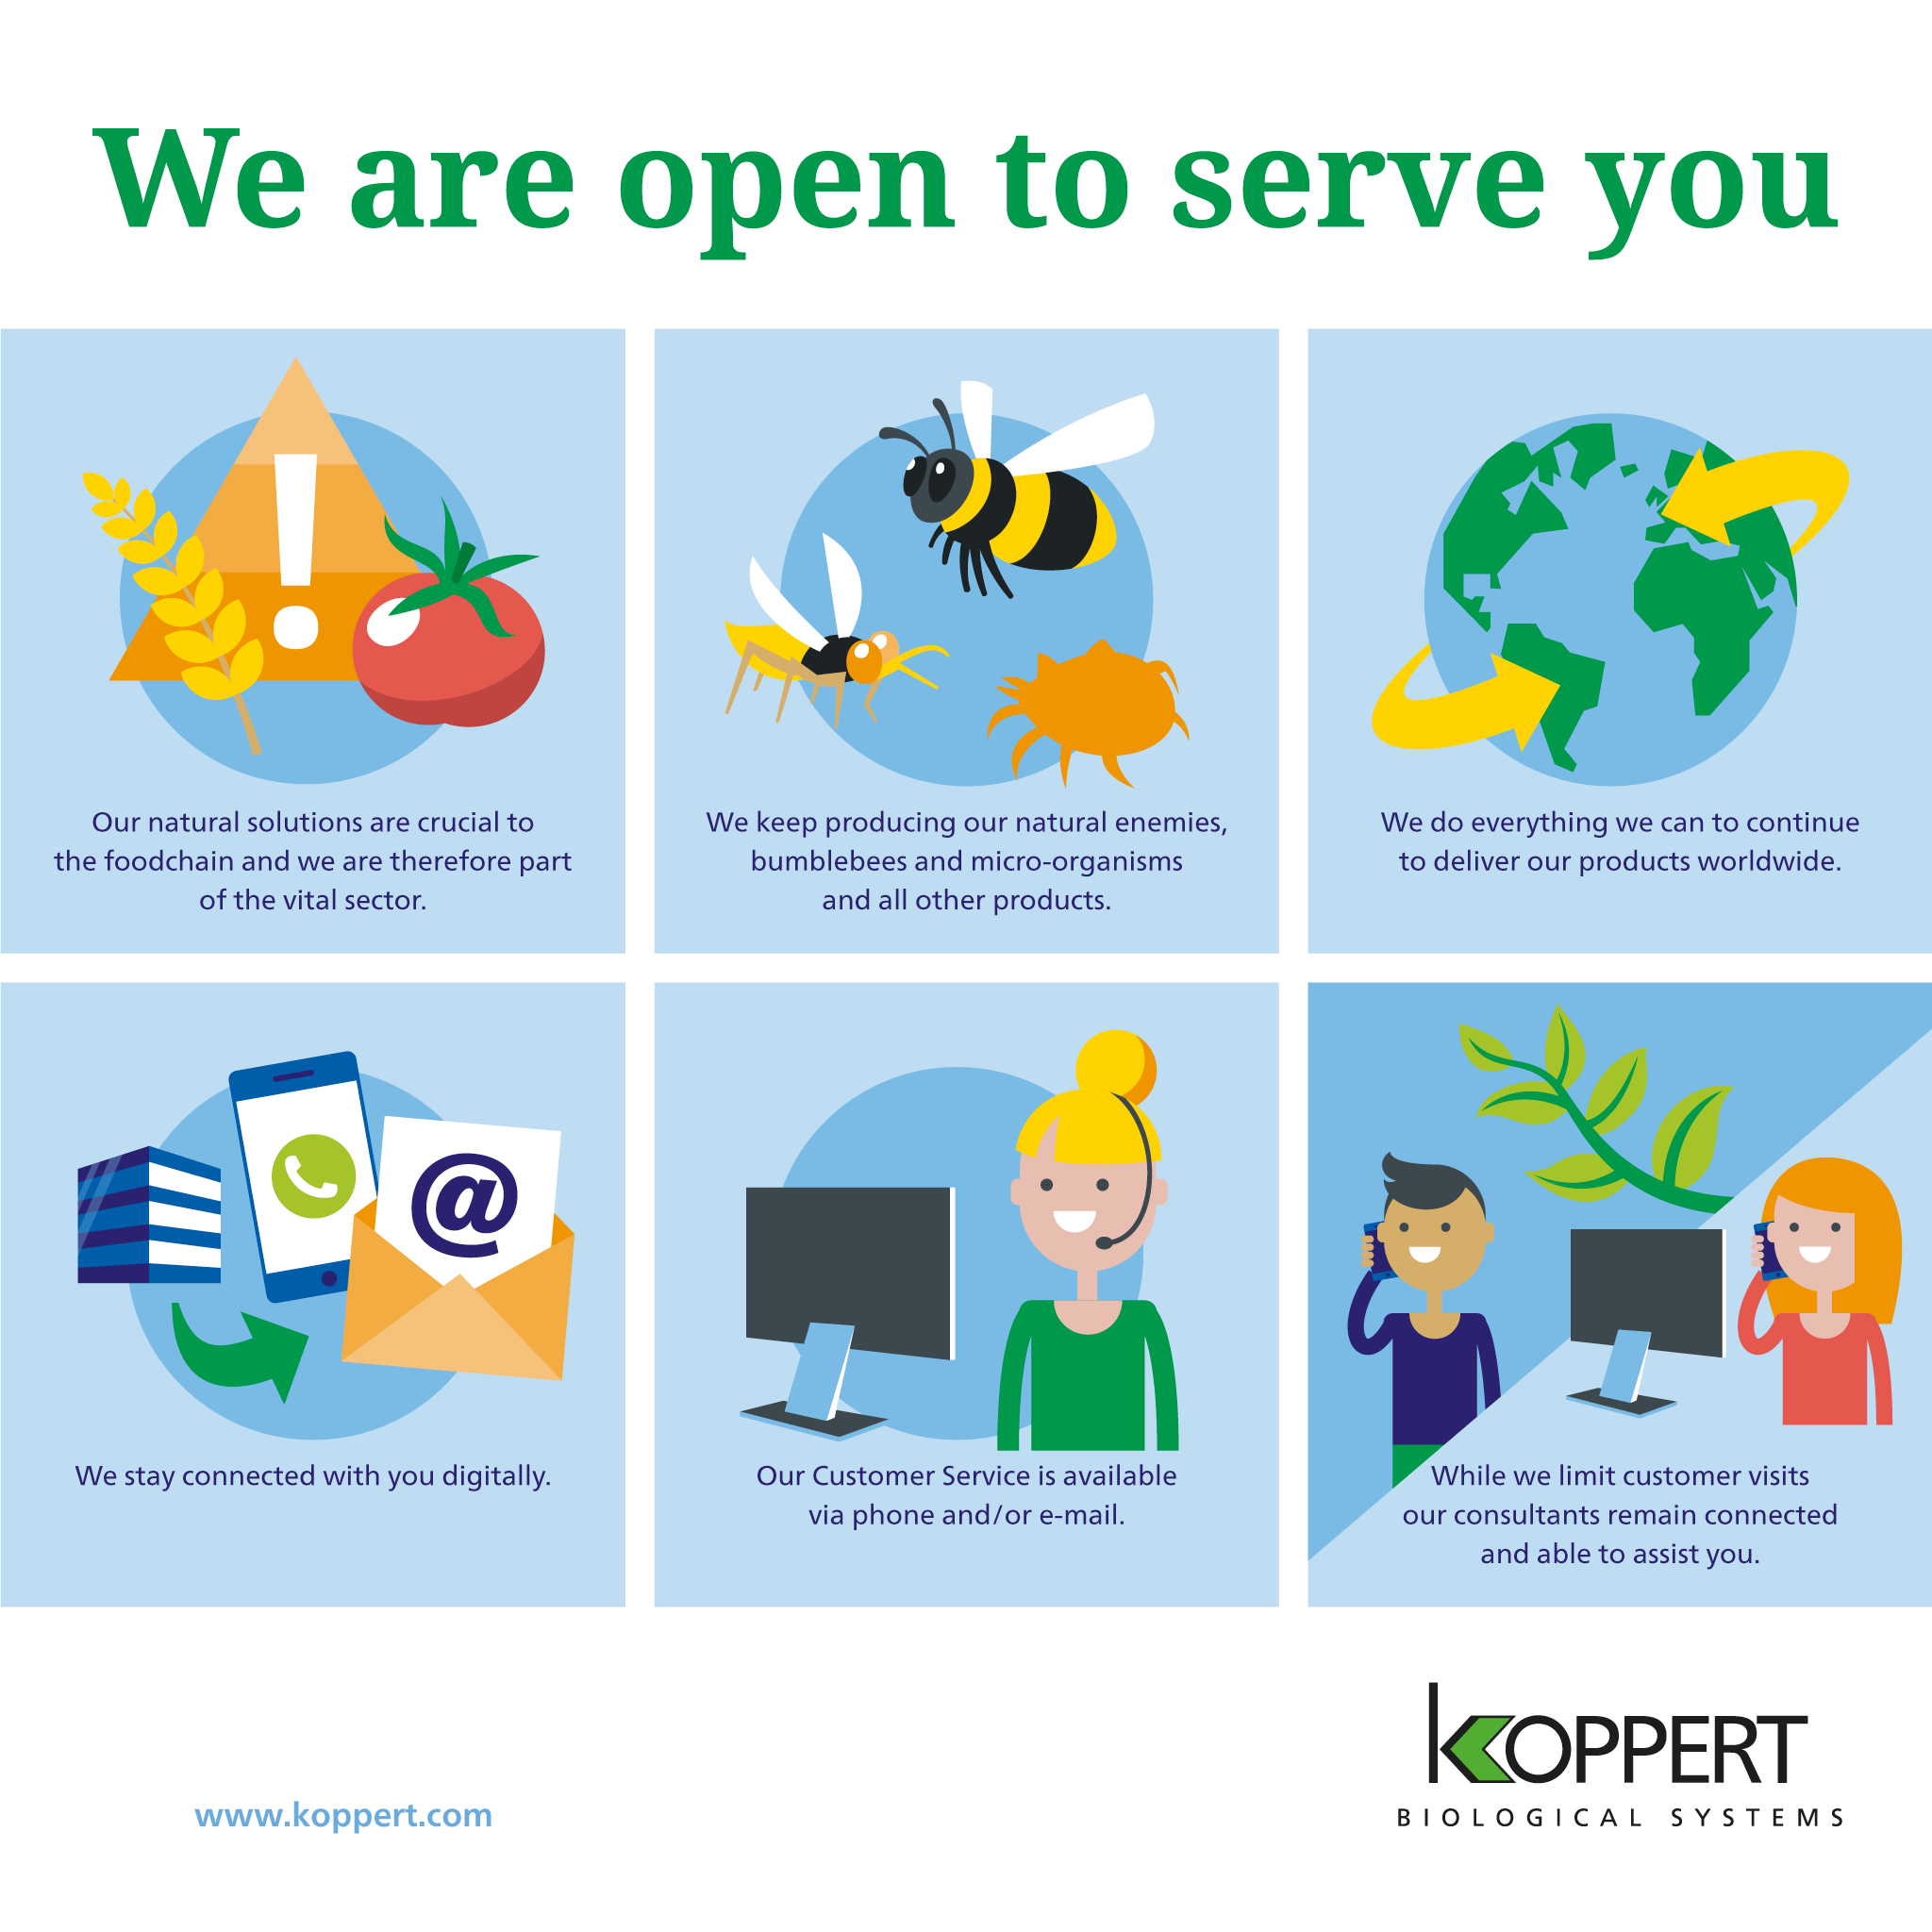 Koppert-_We_are_open_to_serve_you.png